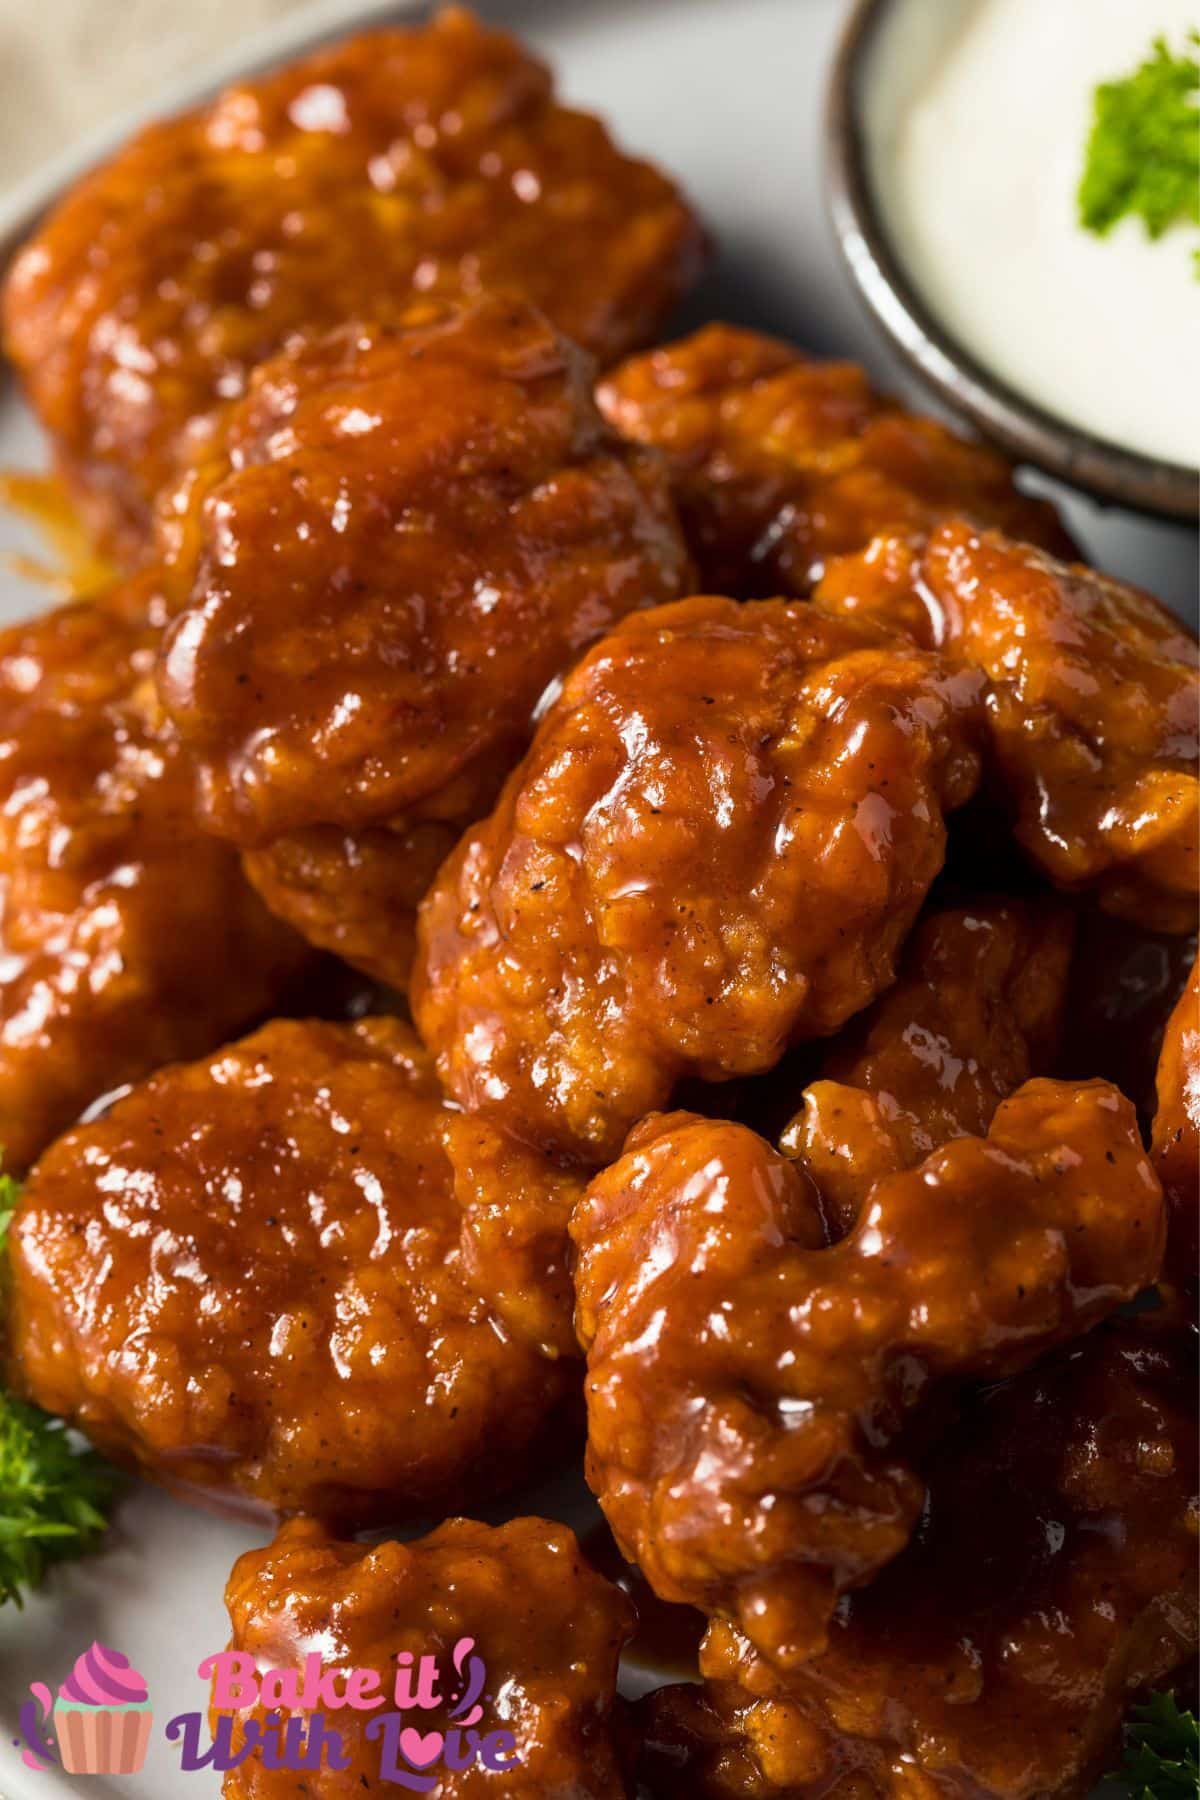 Tall image of boneless chicken wings on a plate.